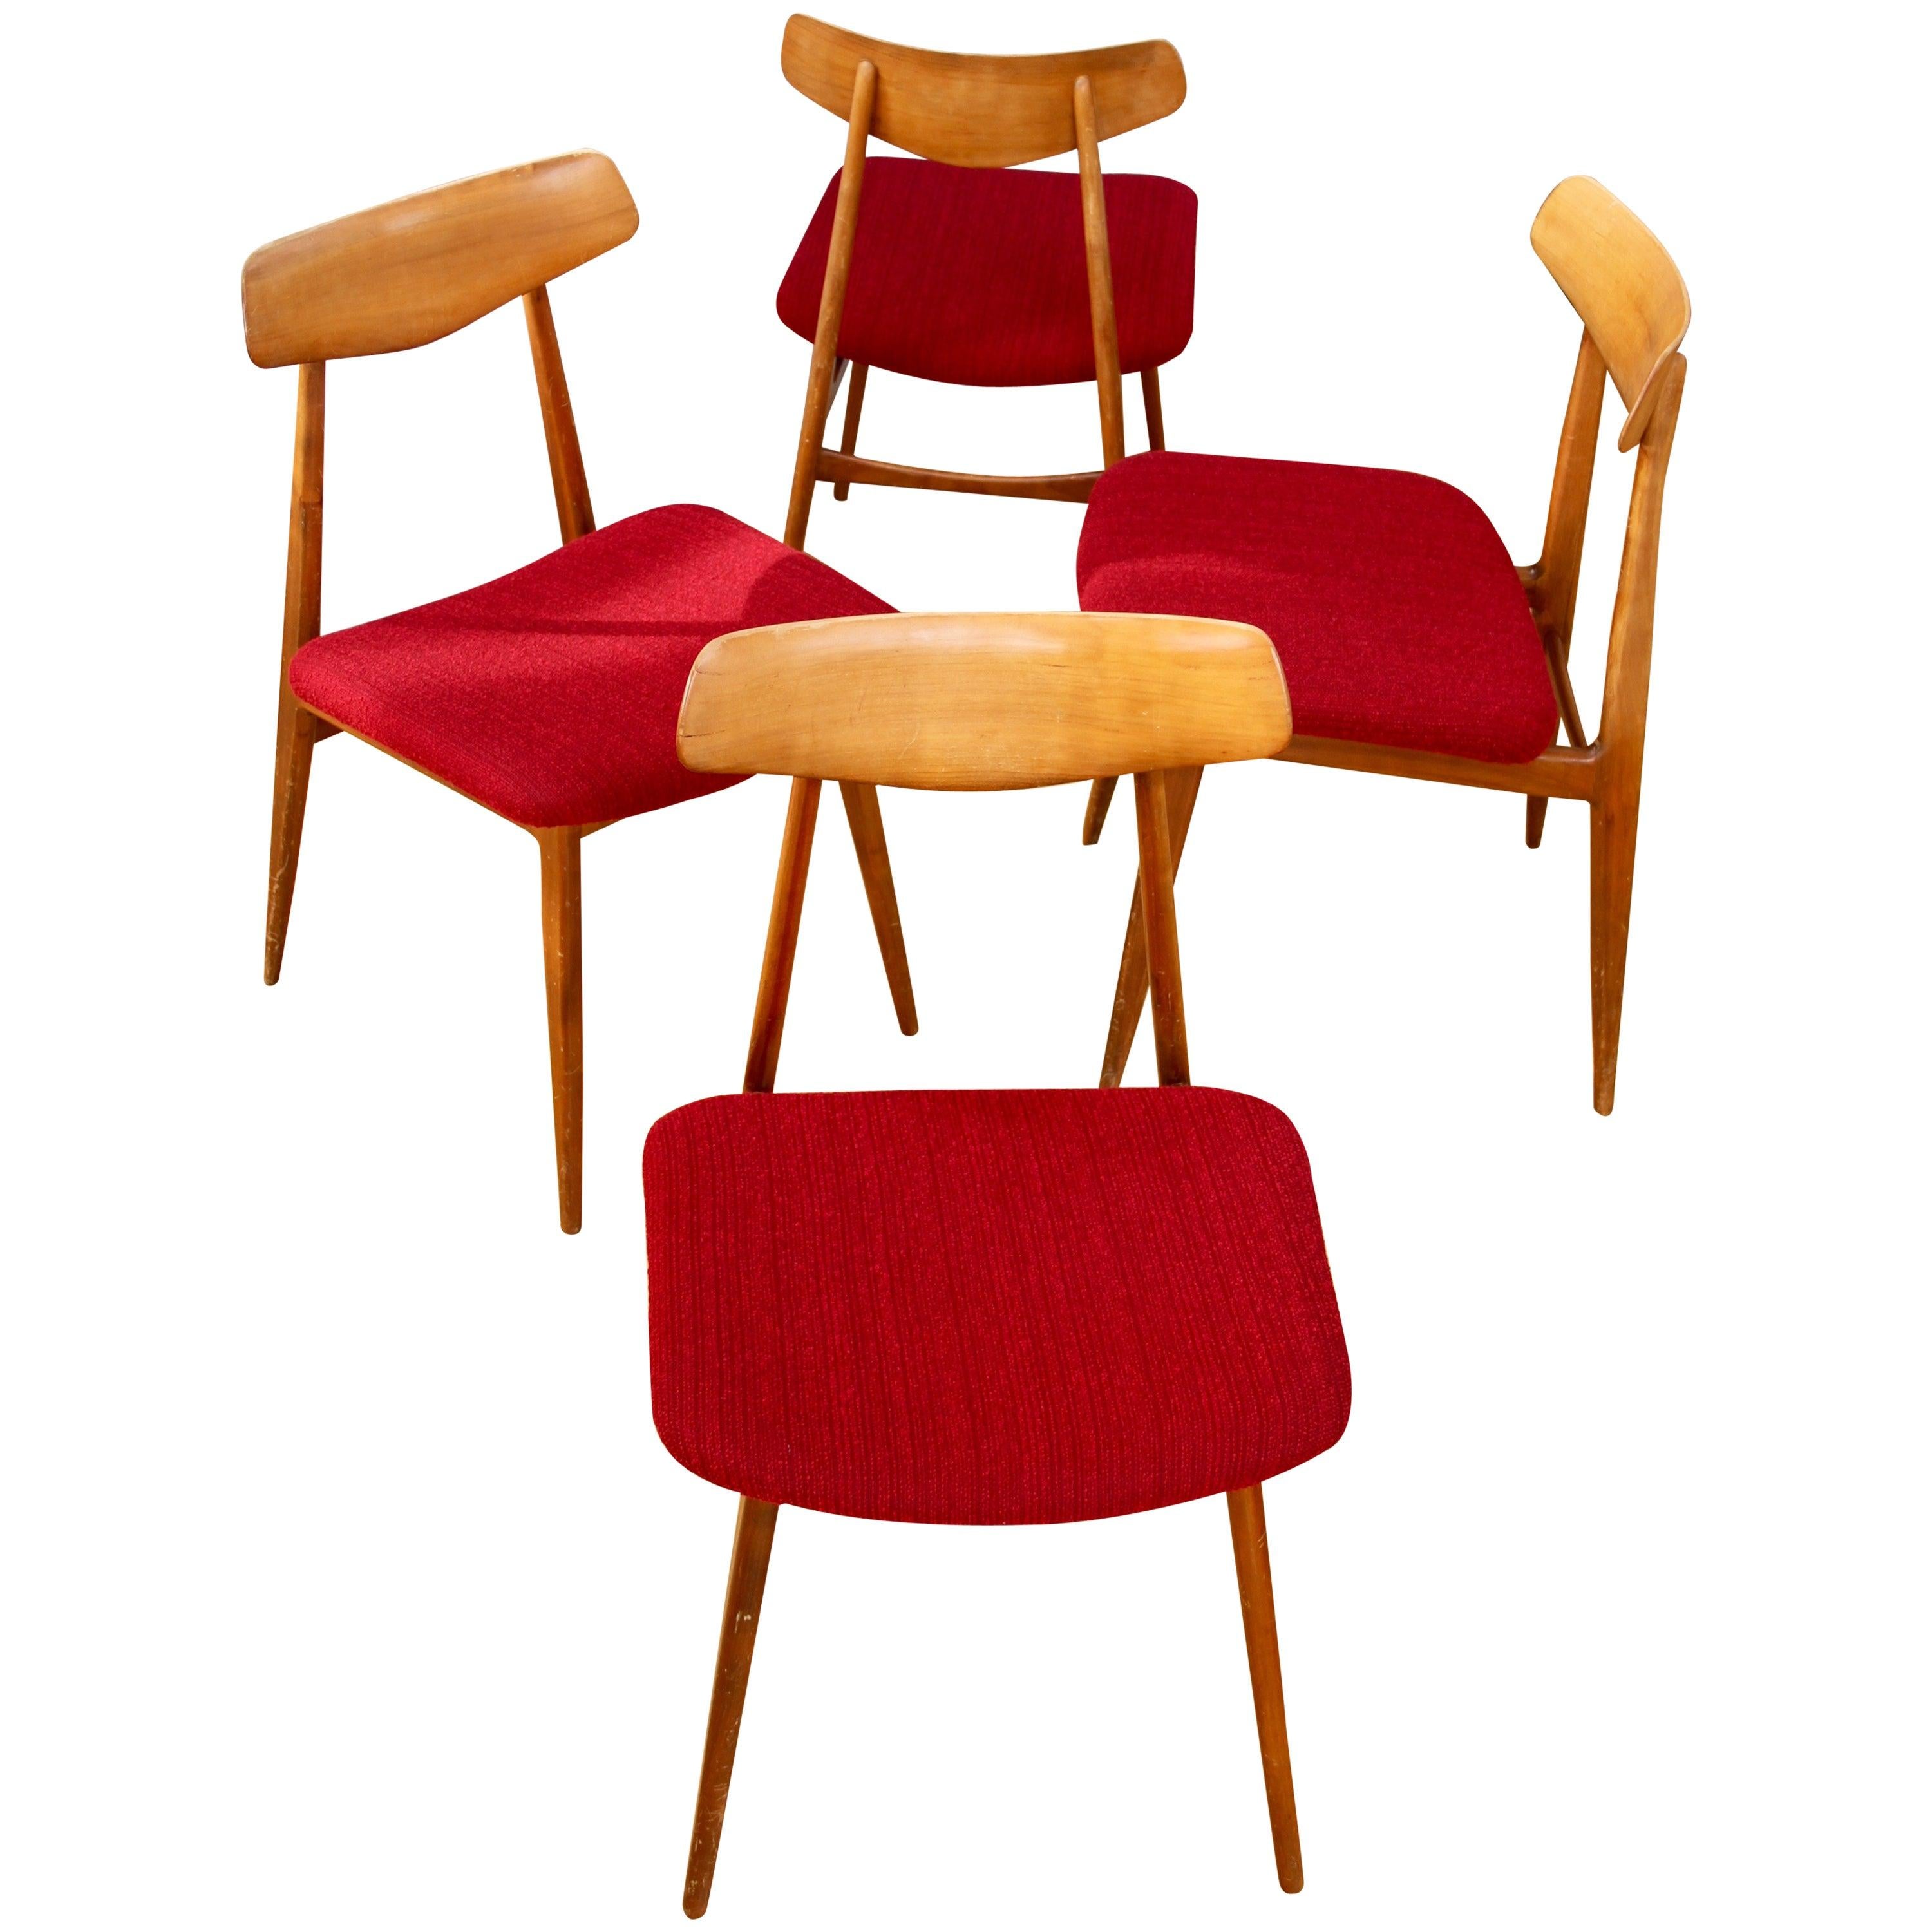 Dyed Set of Four Vintage Midcentury Dining Chairs or Stools by Habeo, circa 1950s